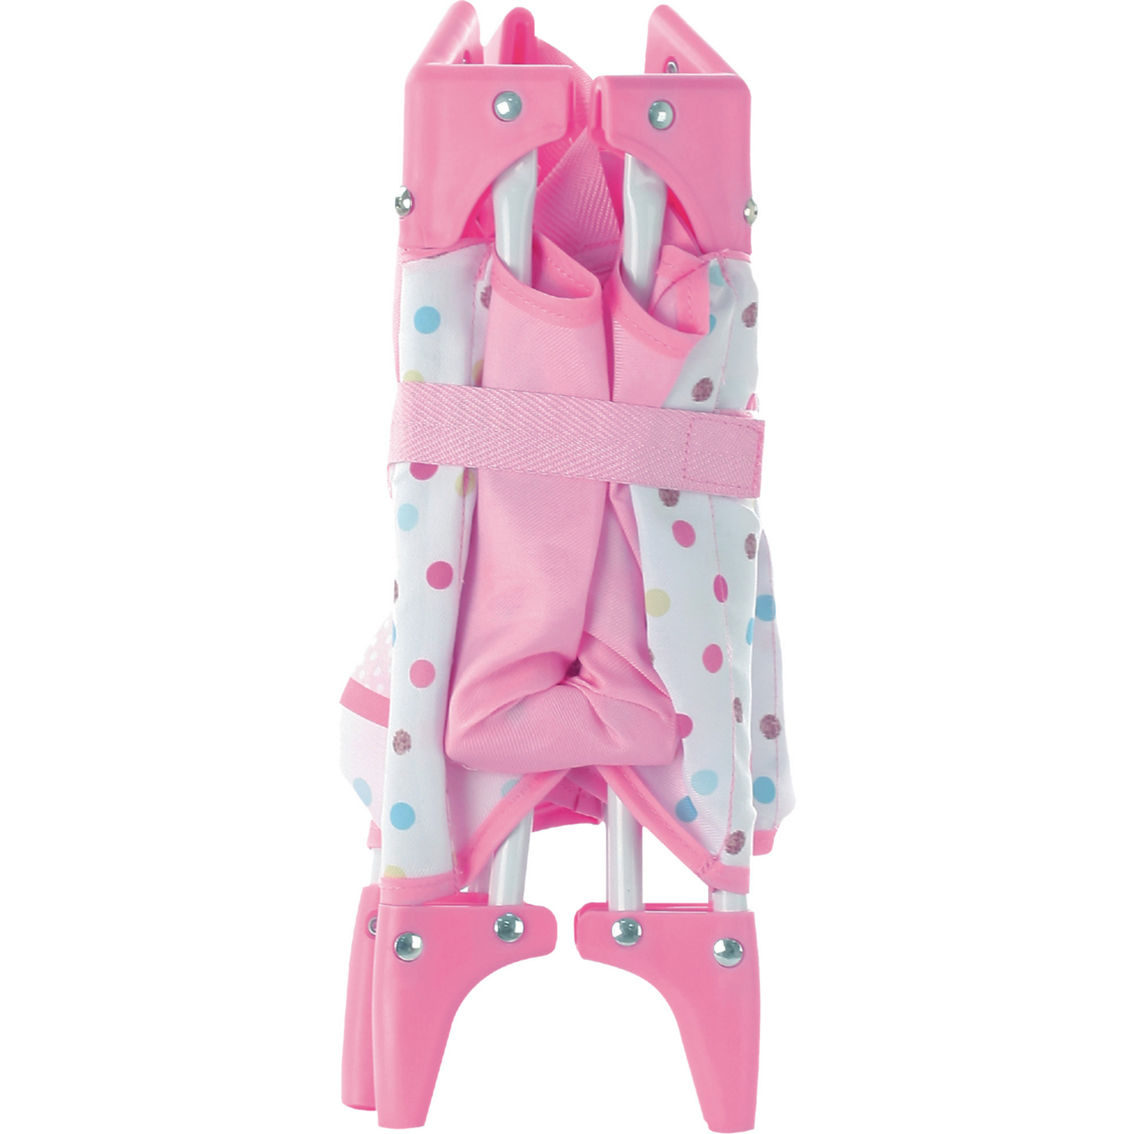 Love Heart Doll Play Yard Baby Doll Accessory - Image 4 of 5